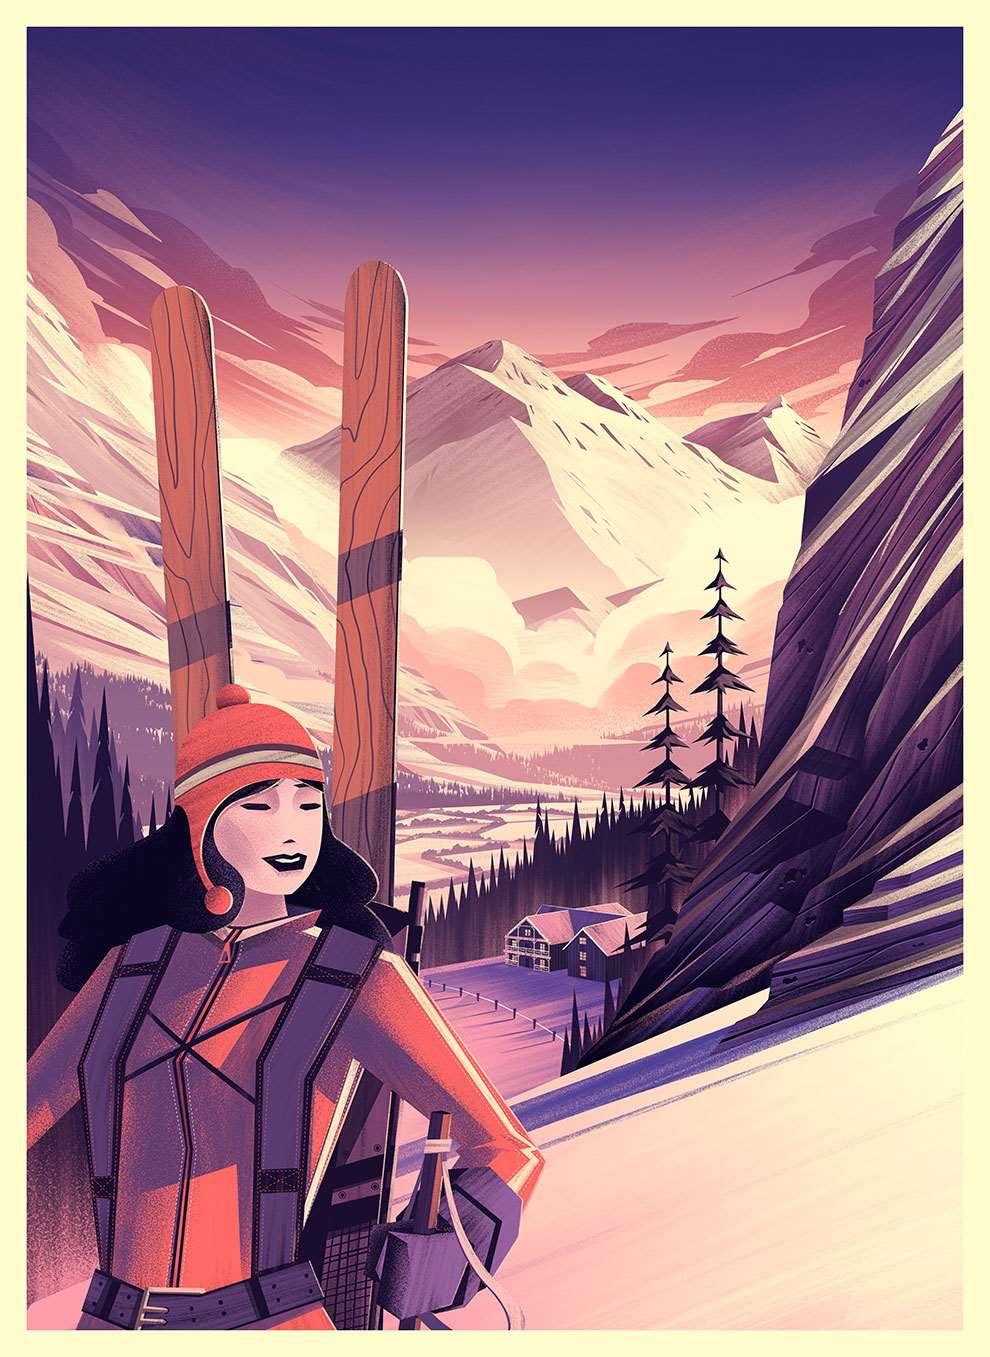 Brian Edward Miller, Custom poster skiing illustration for Øksendal's Phillipshaugen Lodge of a lady in pink skiwear, holding skies with snowy mountains in the background. 